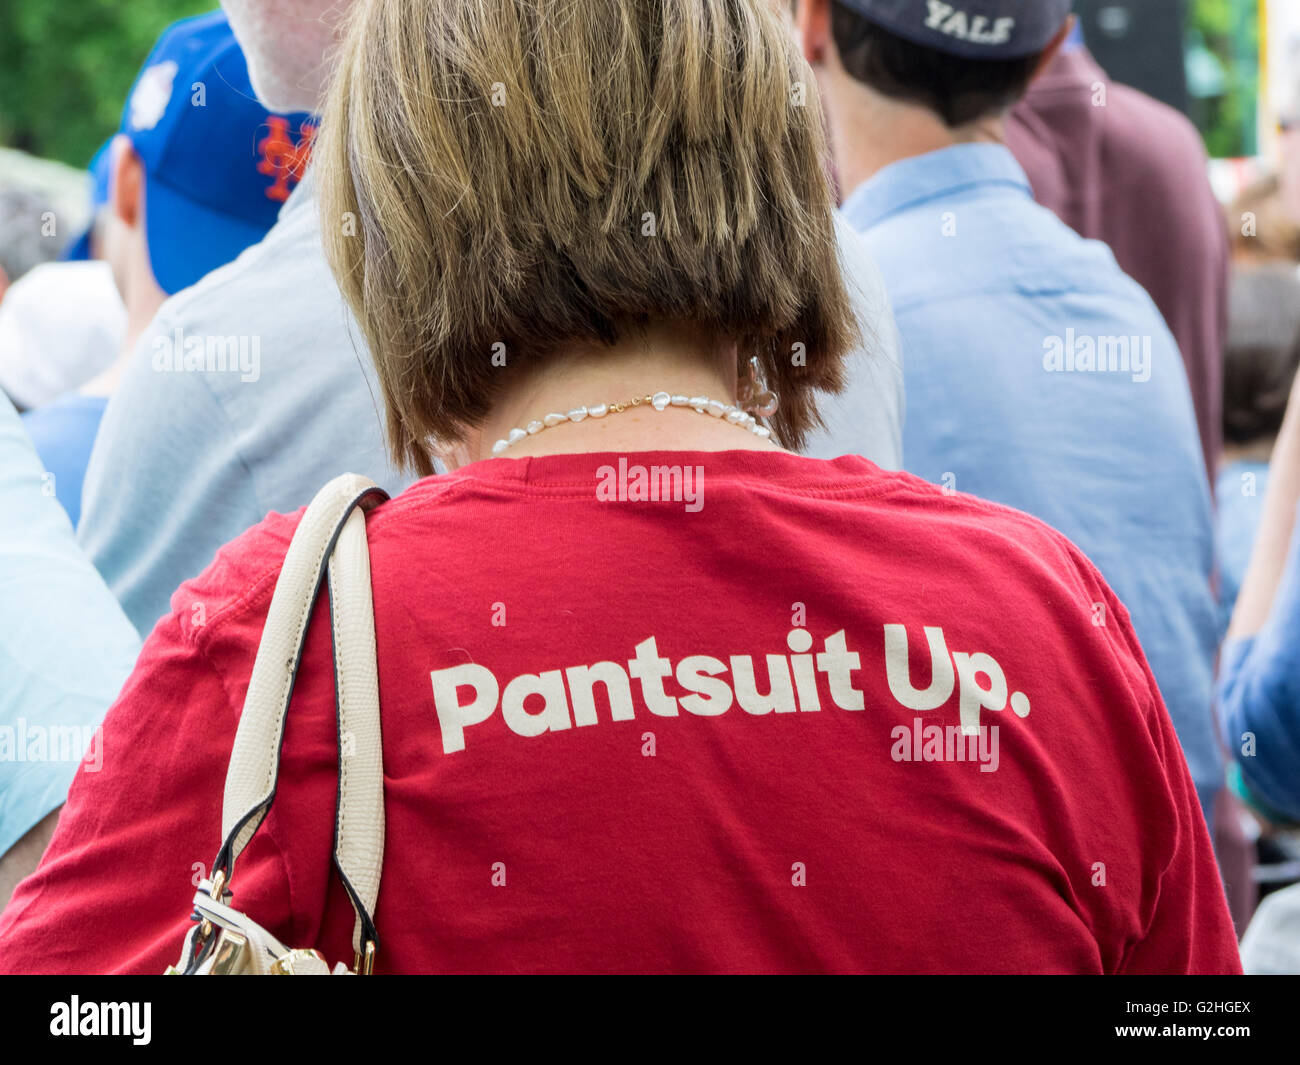 New York, USA. 30th May, 2016. Supporter of US presidential candidate Hillary Clinton wears a t-shirt that says Pantsuit Up at Memorial Day Parade, Chappaqua New York, May 30, 2016. Hillary Clinton clinched the Democratic nomination for president shortly thereafter and is the first woman nominated for president by a major party in US history. Credit:  2016 Marianne A. Campolongo/Alamy Live News. Stock Photo